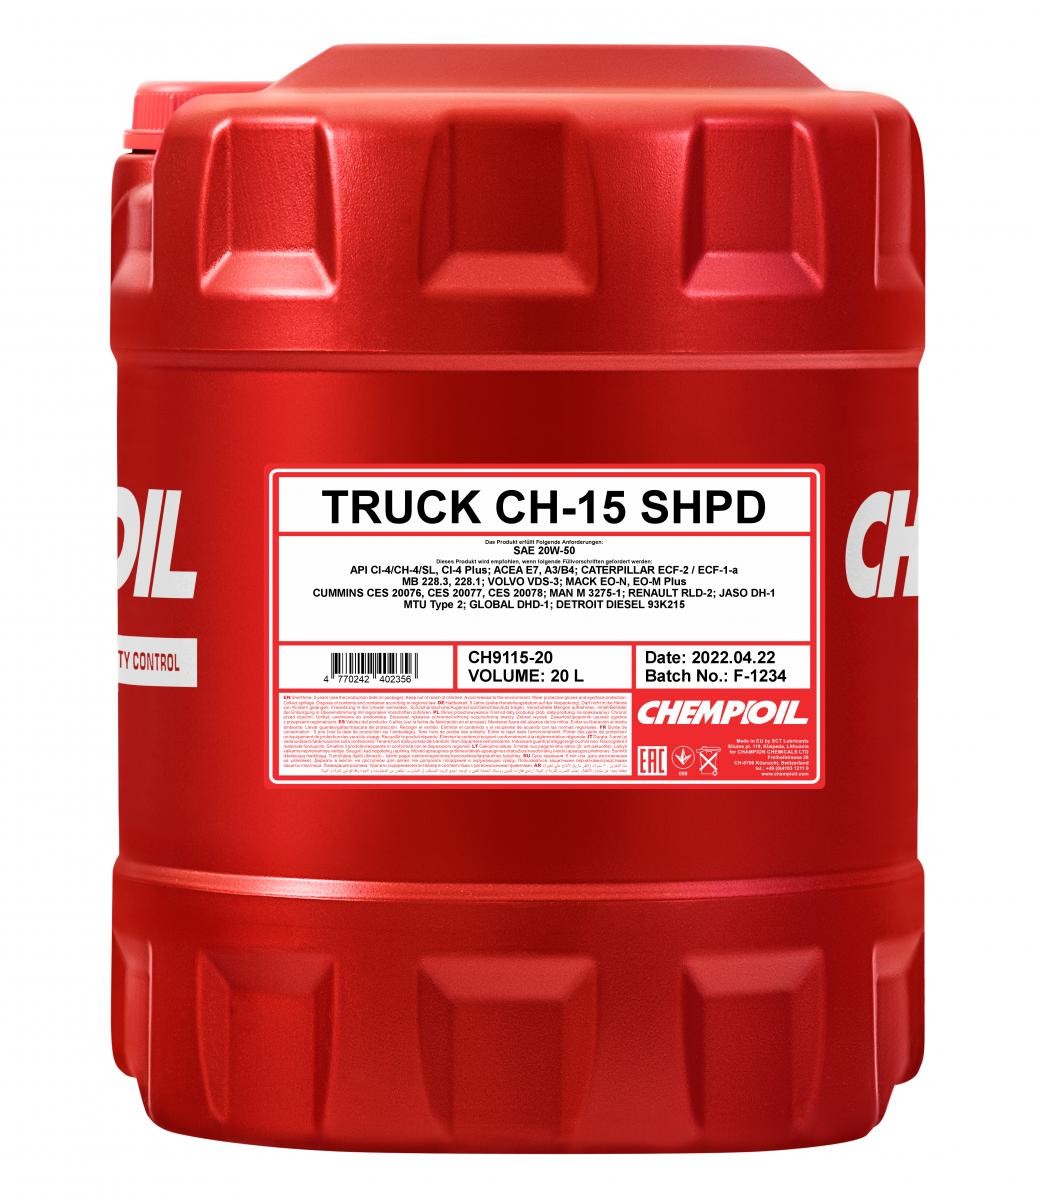 Great value for money - CHEMPIOIL Engine oil CH9115-20